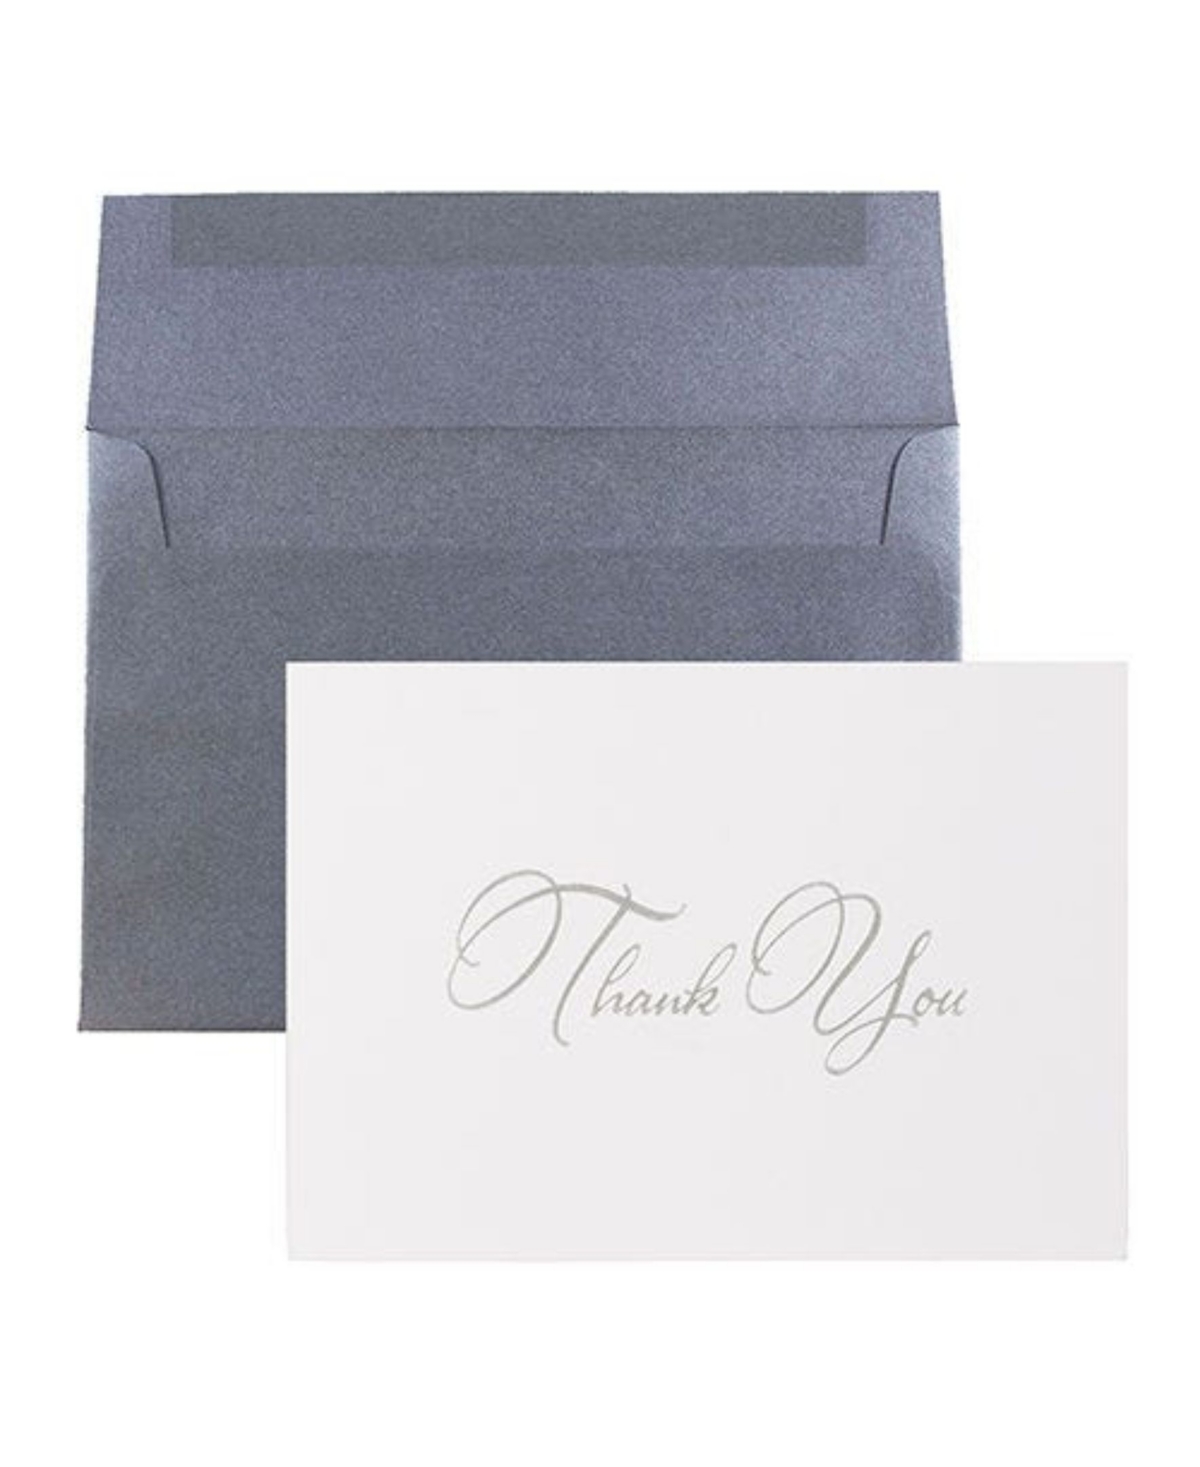 Jam Paper Thank You Card Sets In Silver Script Cards Anthracite Envelopes